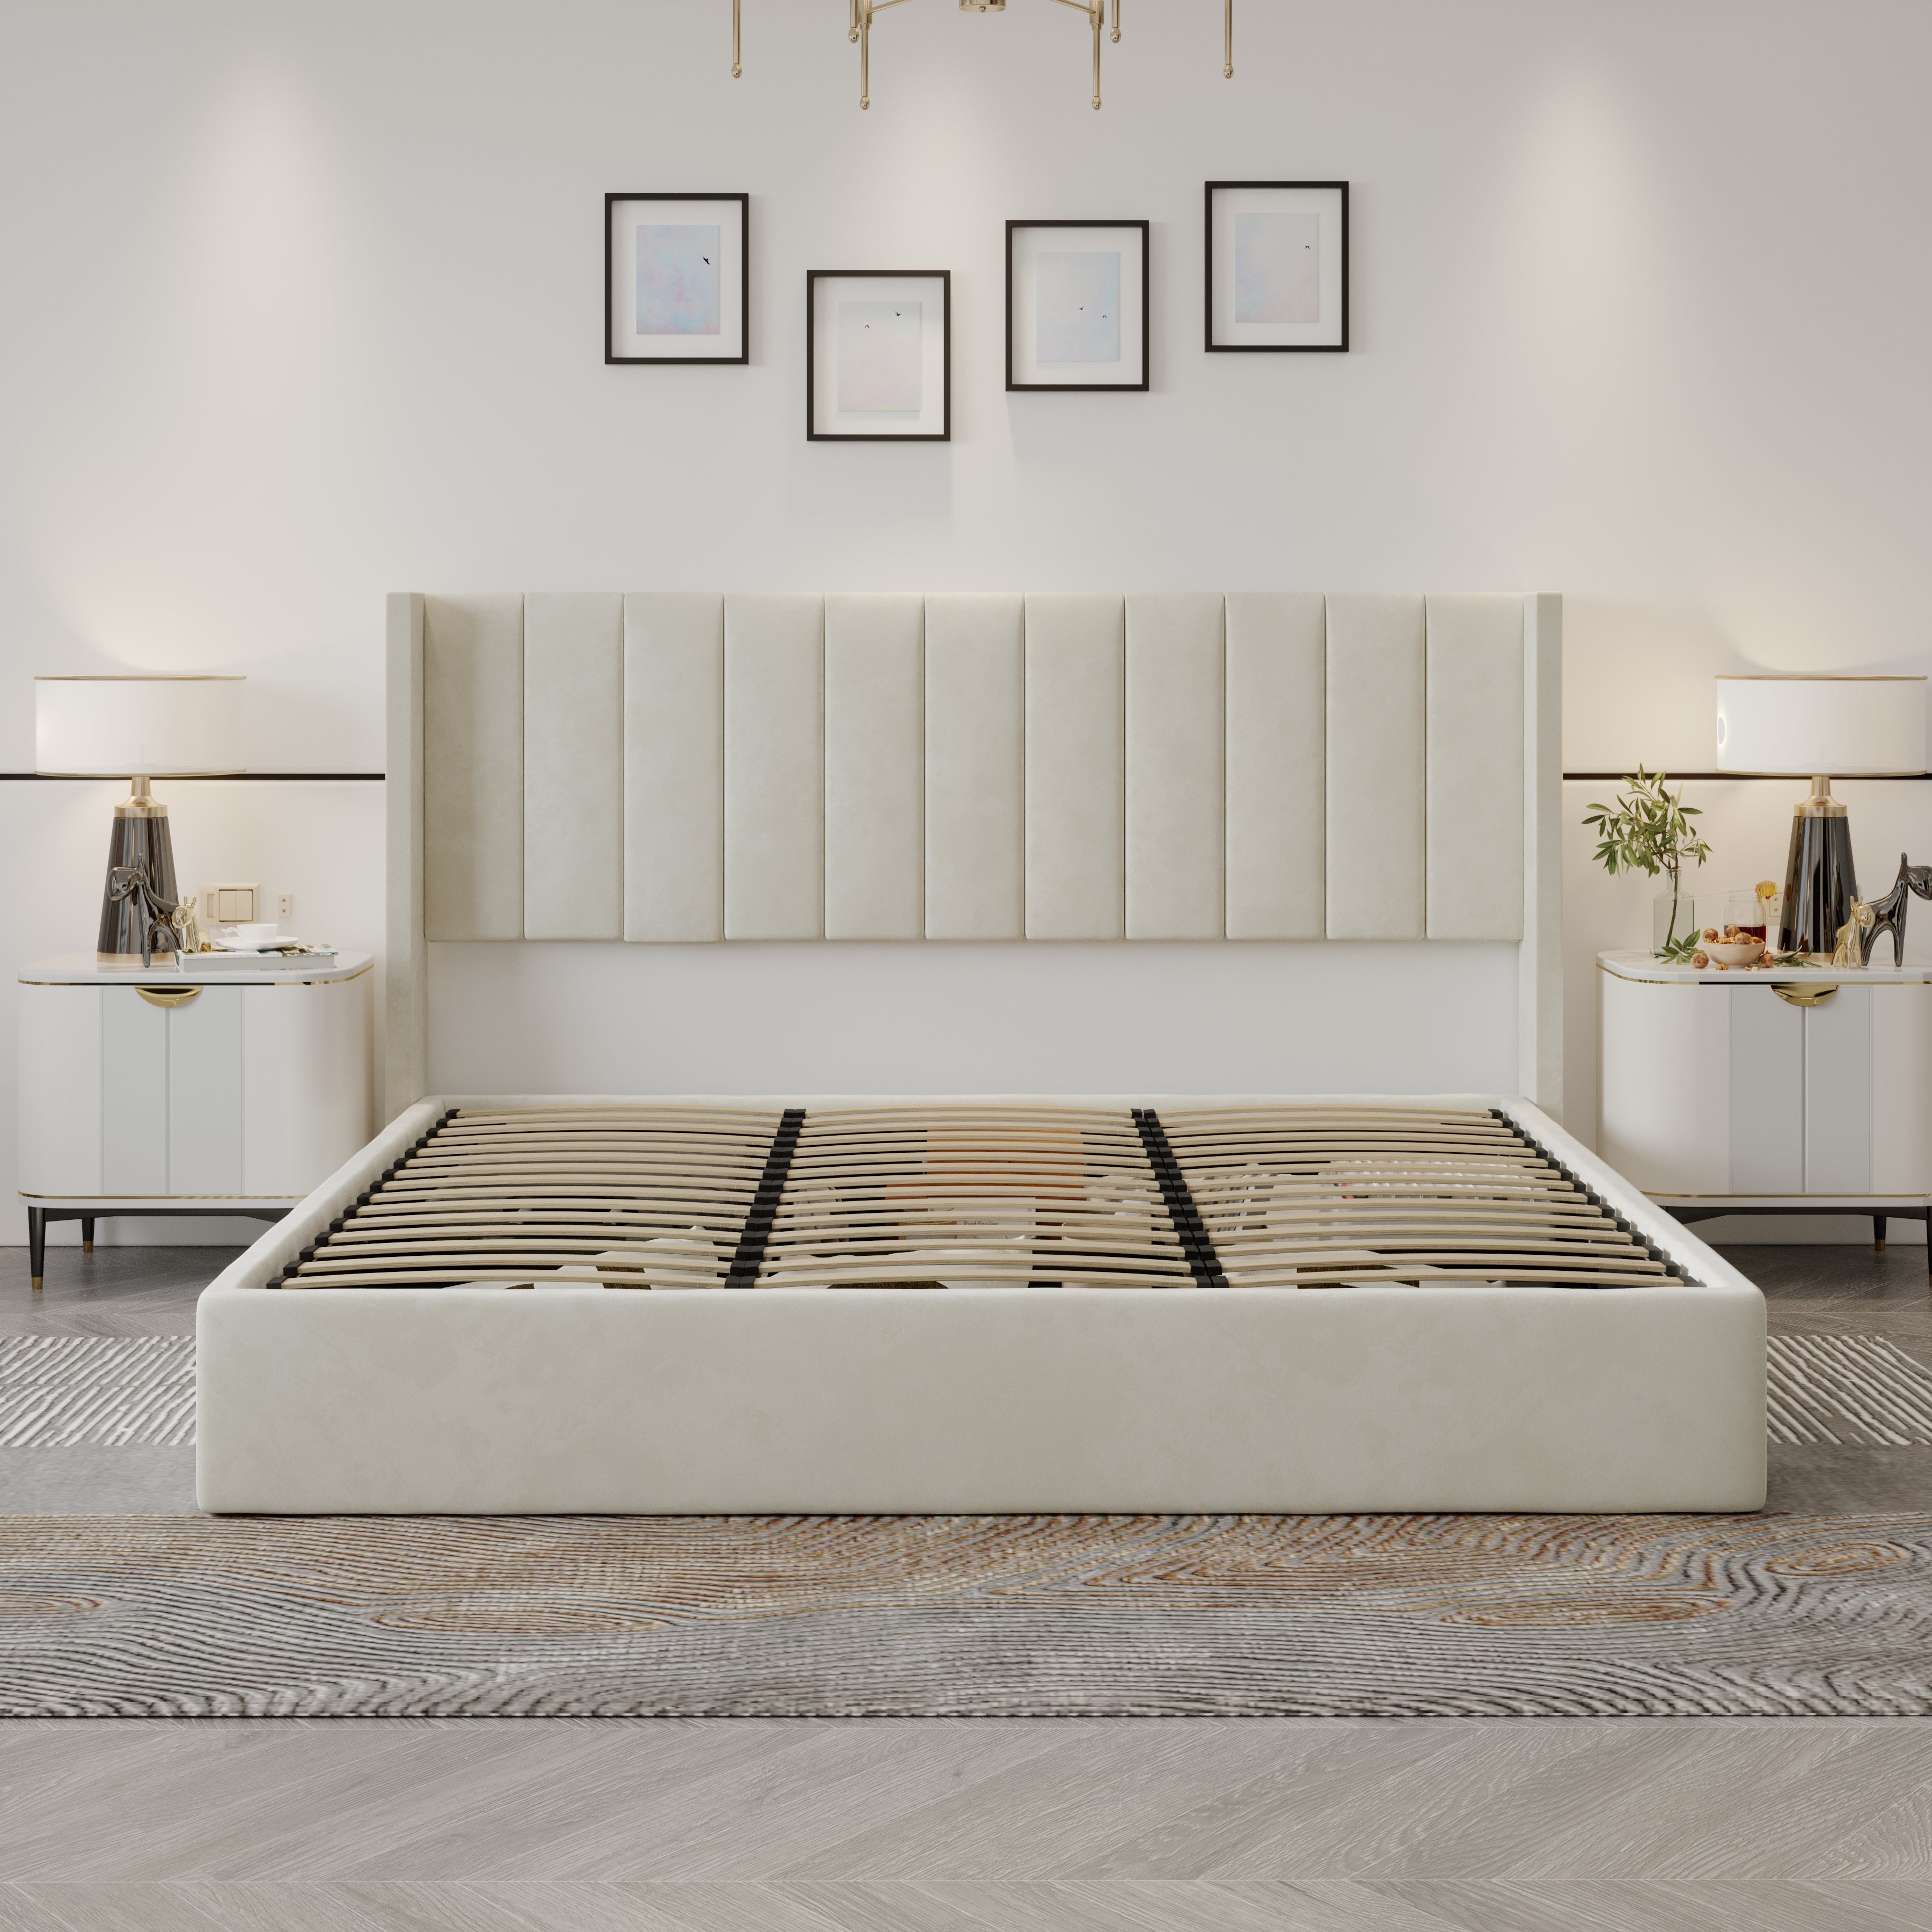 Velets Oliver Contemporary Mid-Century Soft Padded Upholstered Platform Storage Bed with Hydraulic Gas Lift Storage - Solid Wood Frame, Wood Slat System & Smart Hydraulic Under-Bed Storage -  Ivory